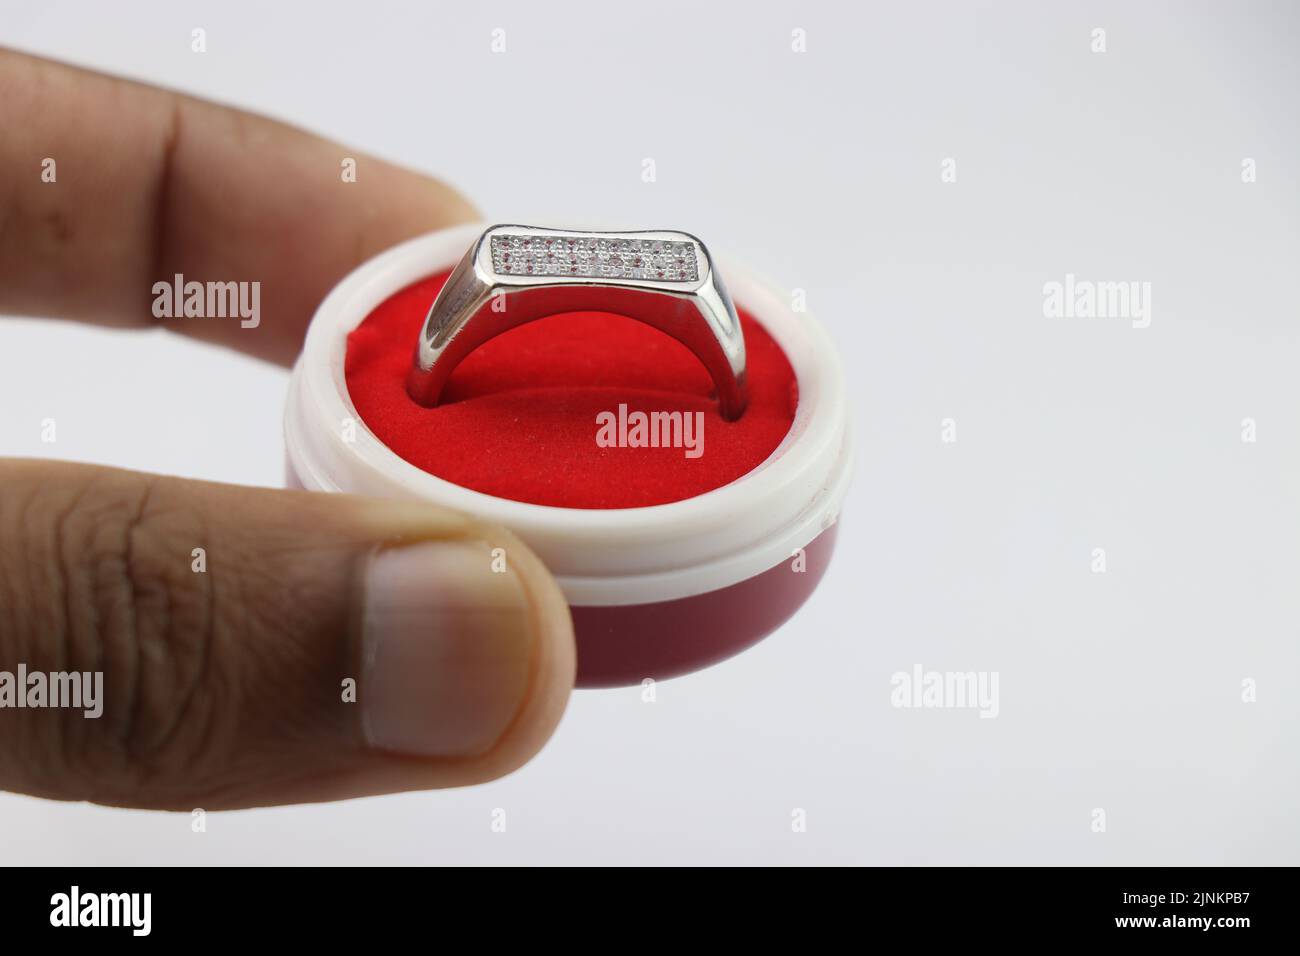 Engagement ring in a box, Silver ring in a small red jewelry box held in hand on white background Stock Photo